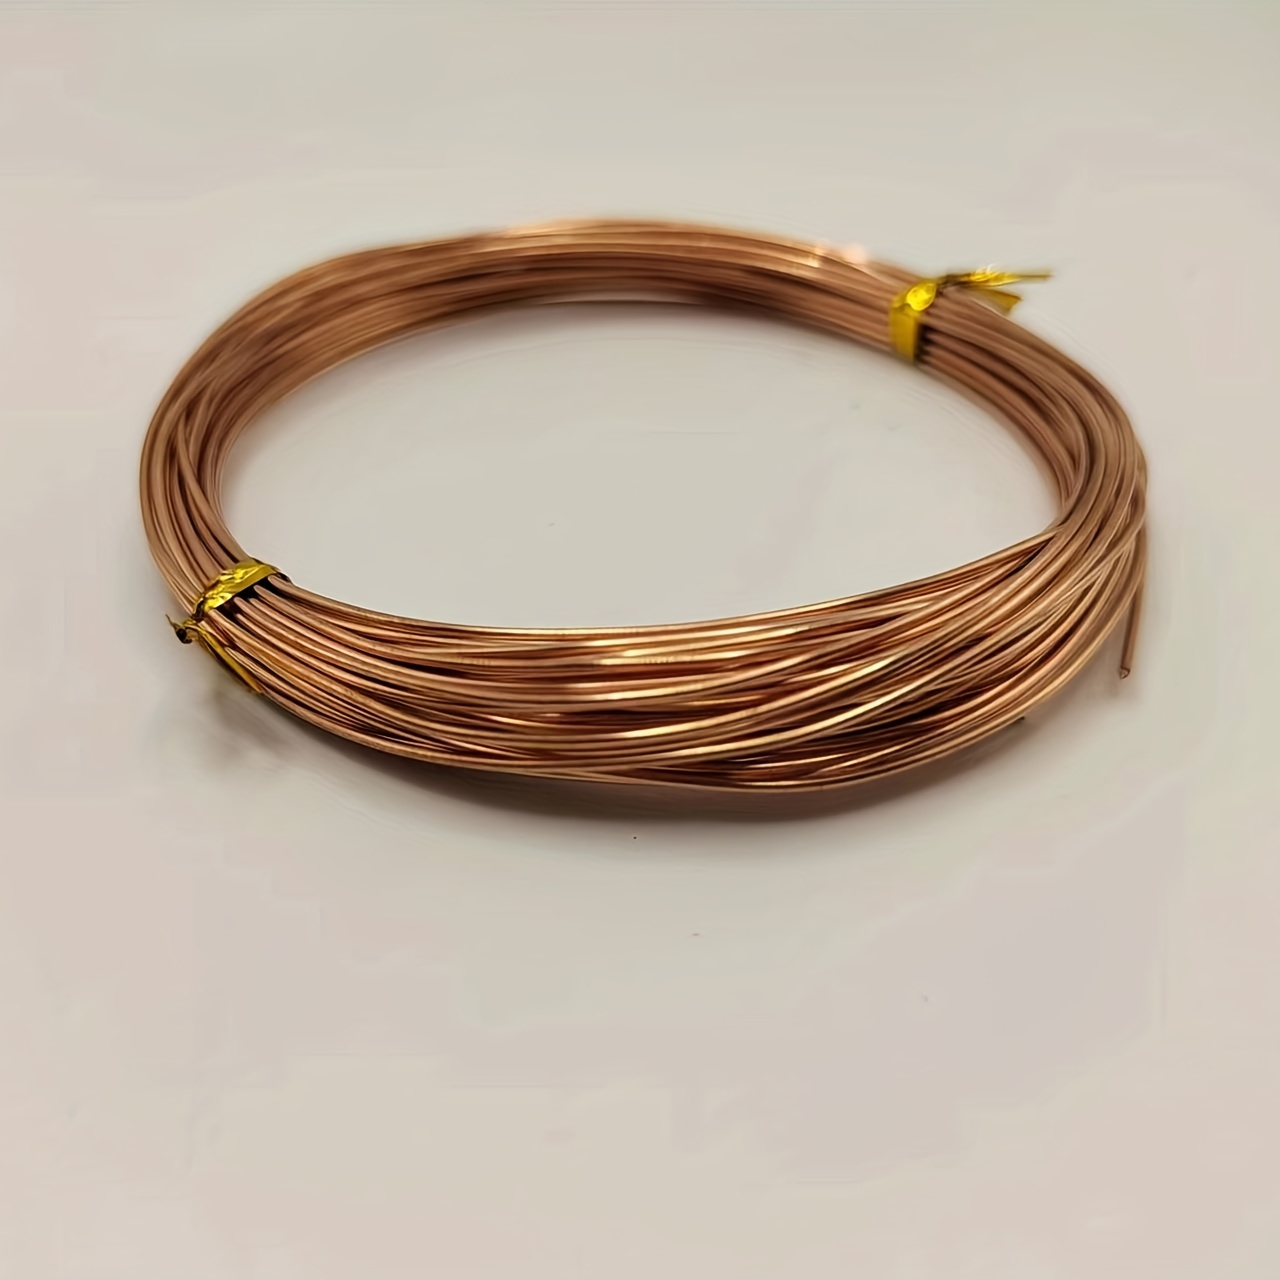 Solid Bare Copper Round Jewelry Wire for Jewelry Making, Craft